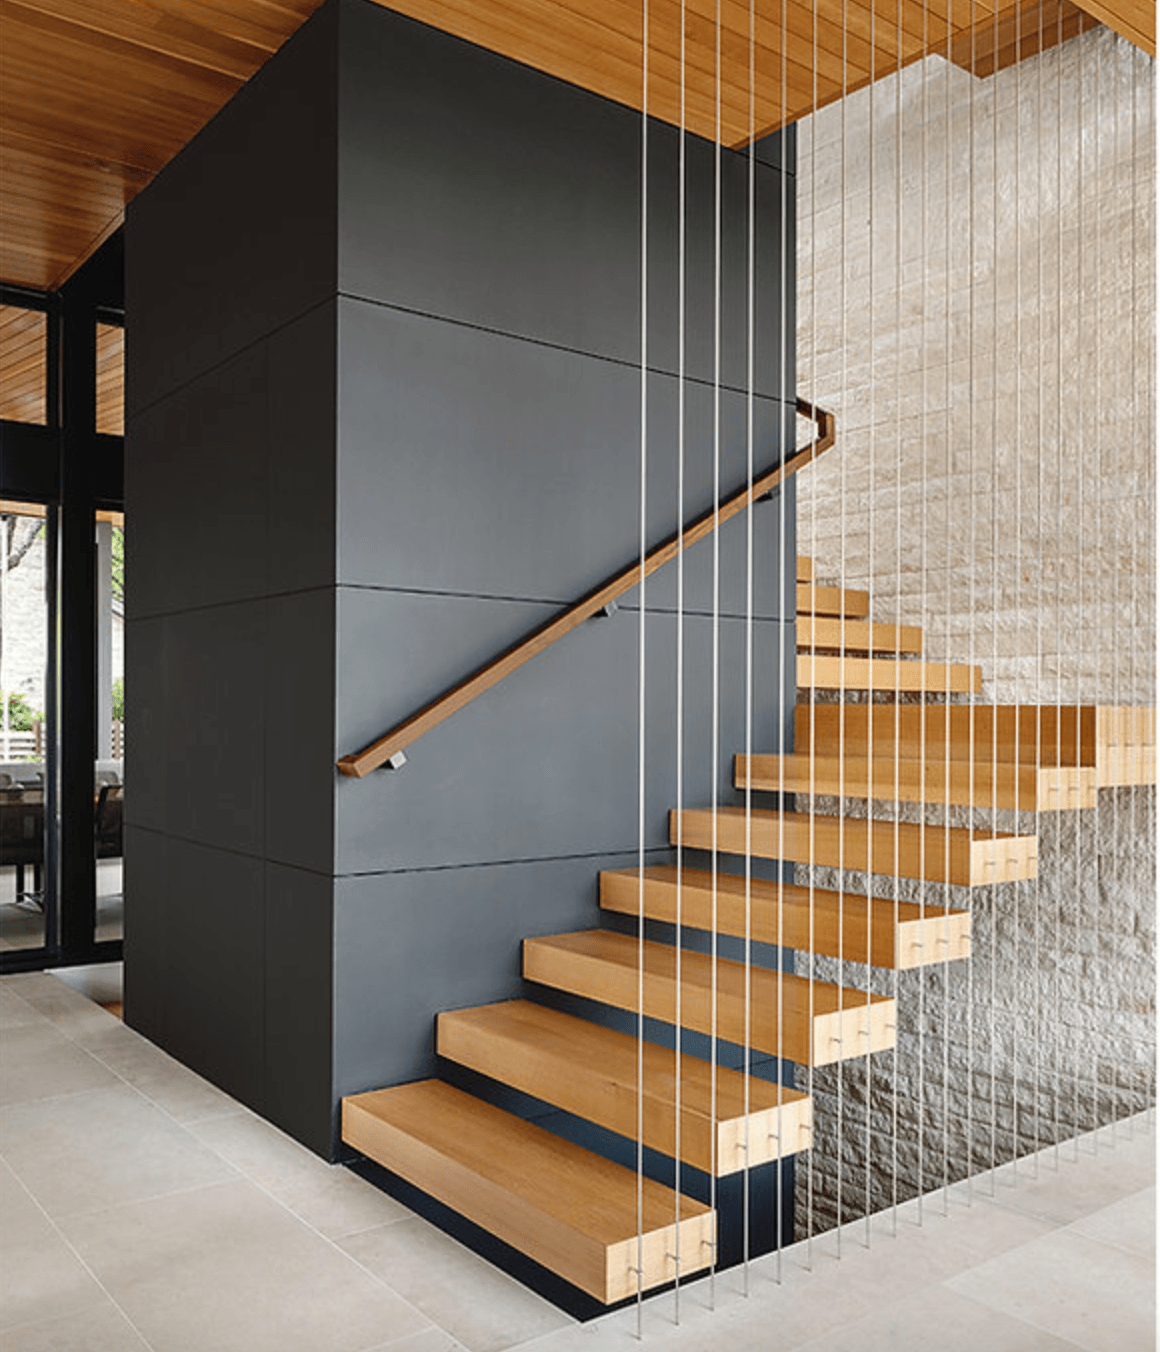 Floating staircase by Cornerstone Architects